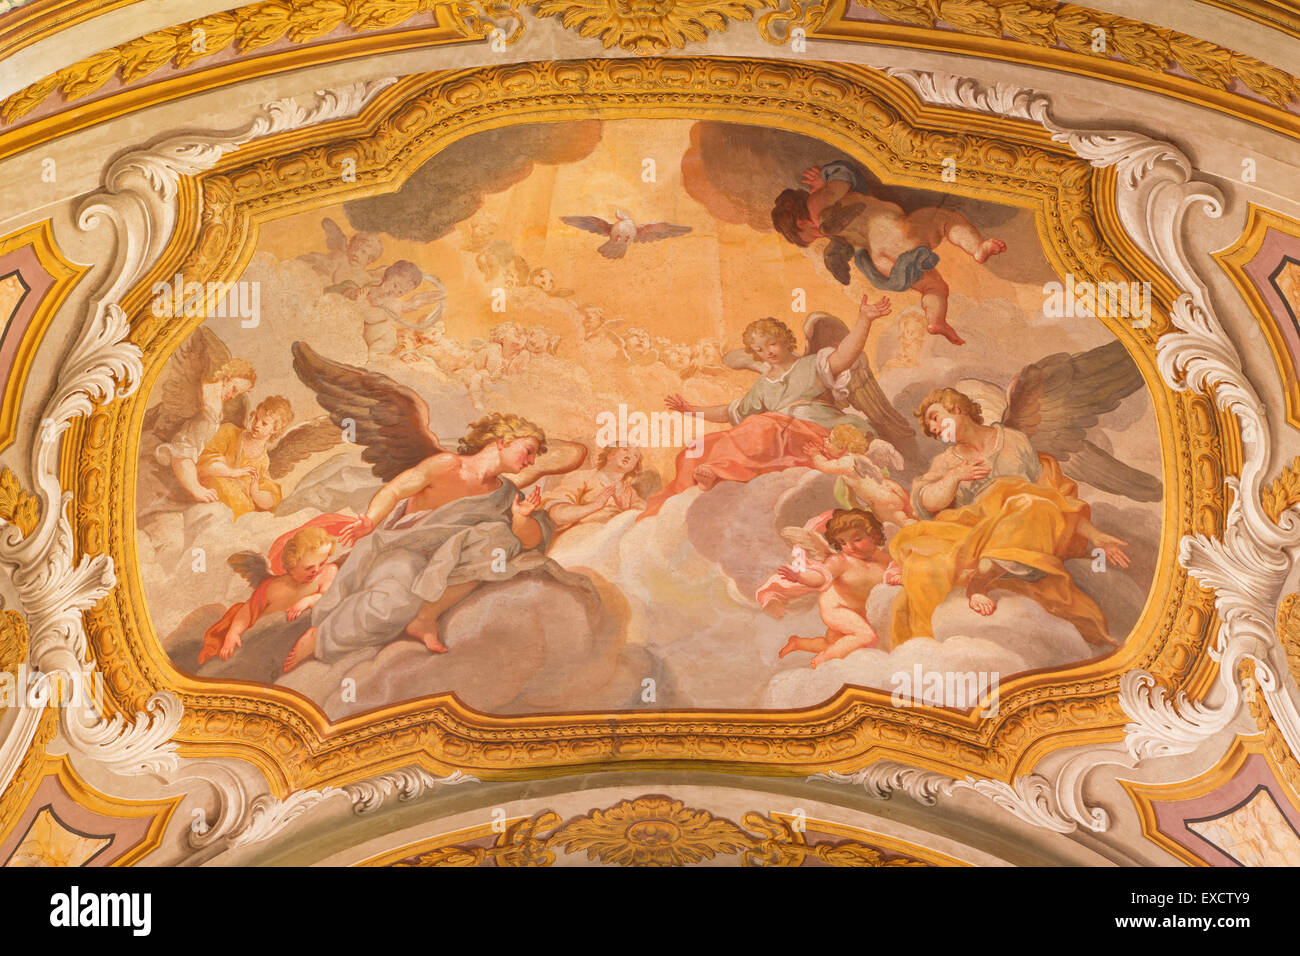 Rome - The ceiling fresco of Angels with the Holy Spirit  from 17. cent. in church Chiesa di Santa Maria in Transpontina Stock Photo